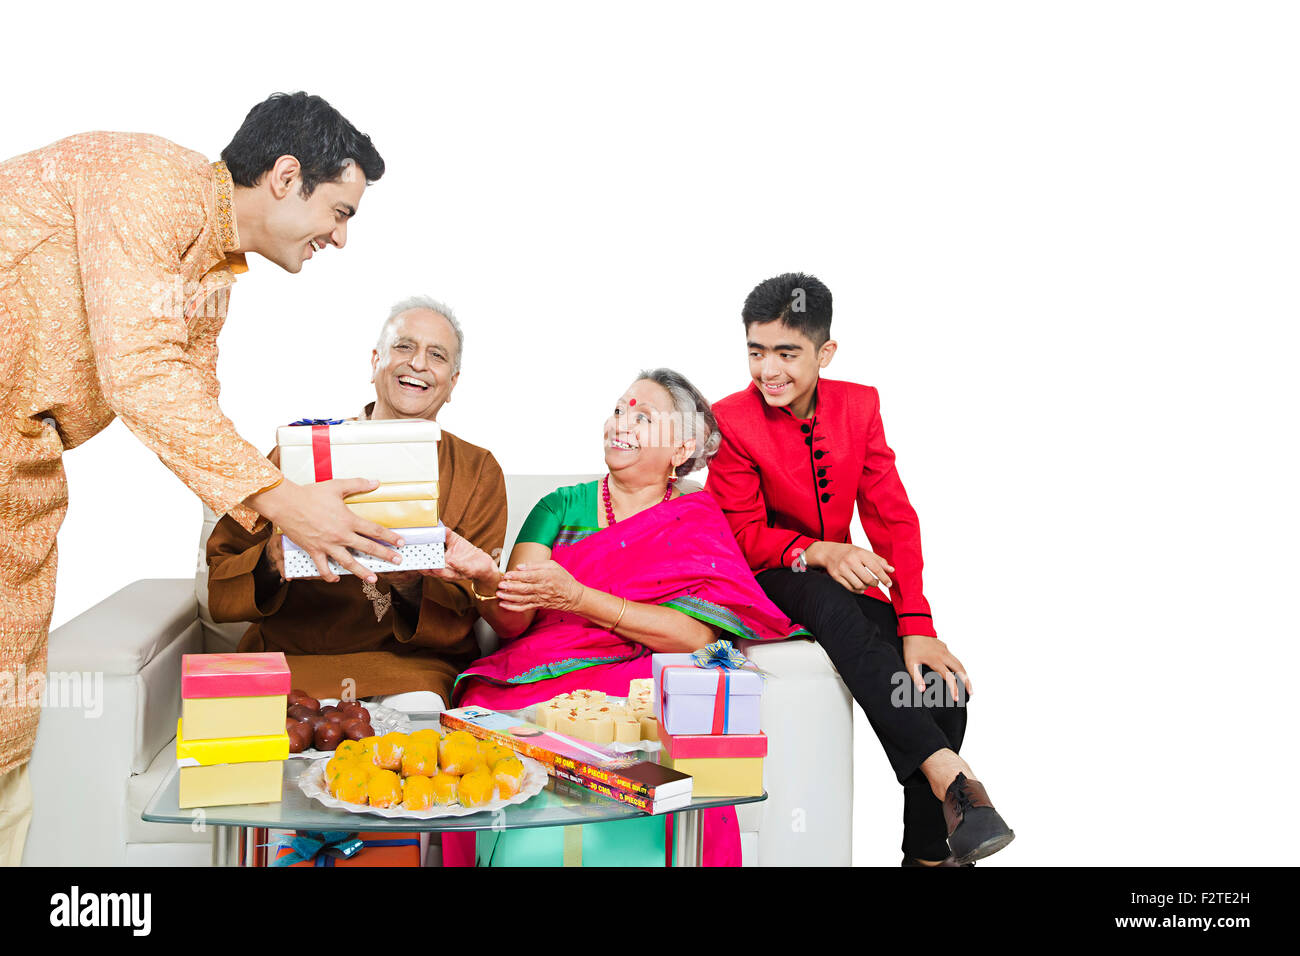 4 indian Grandson Parents and son diwali Festival gift Giving Stock Photo